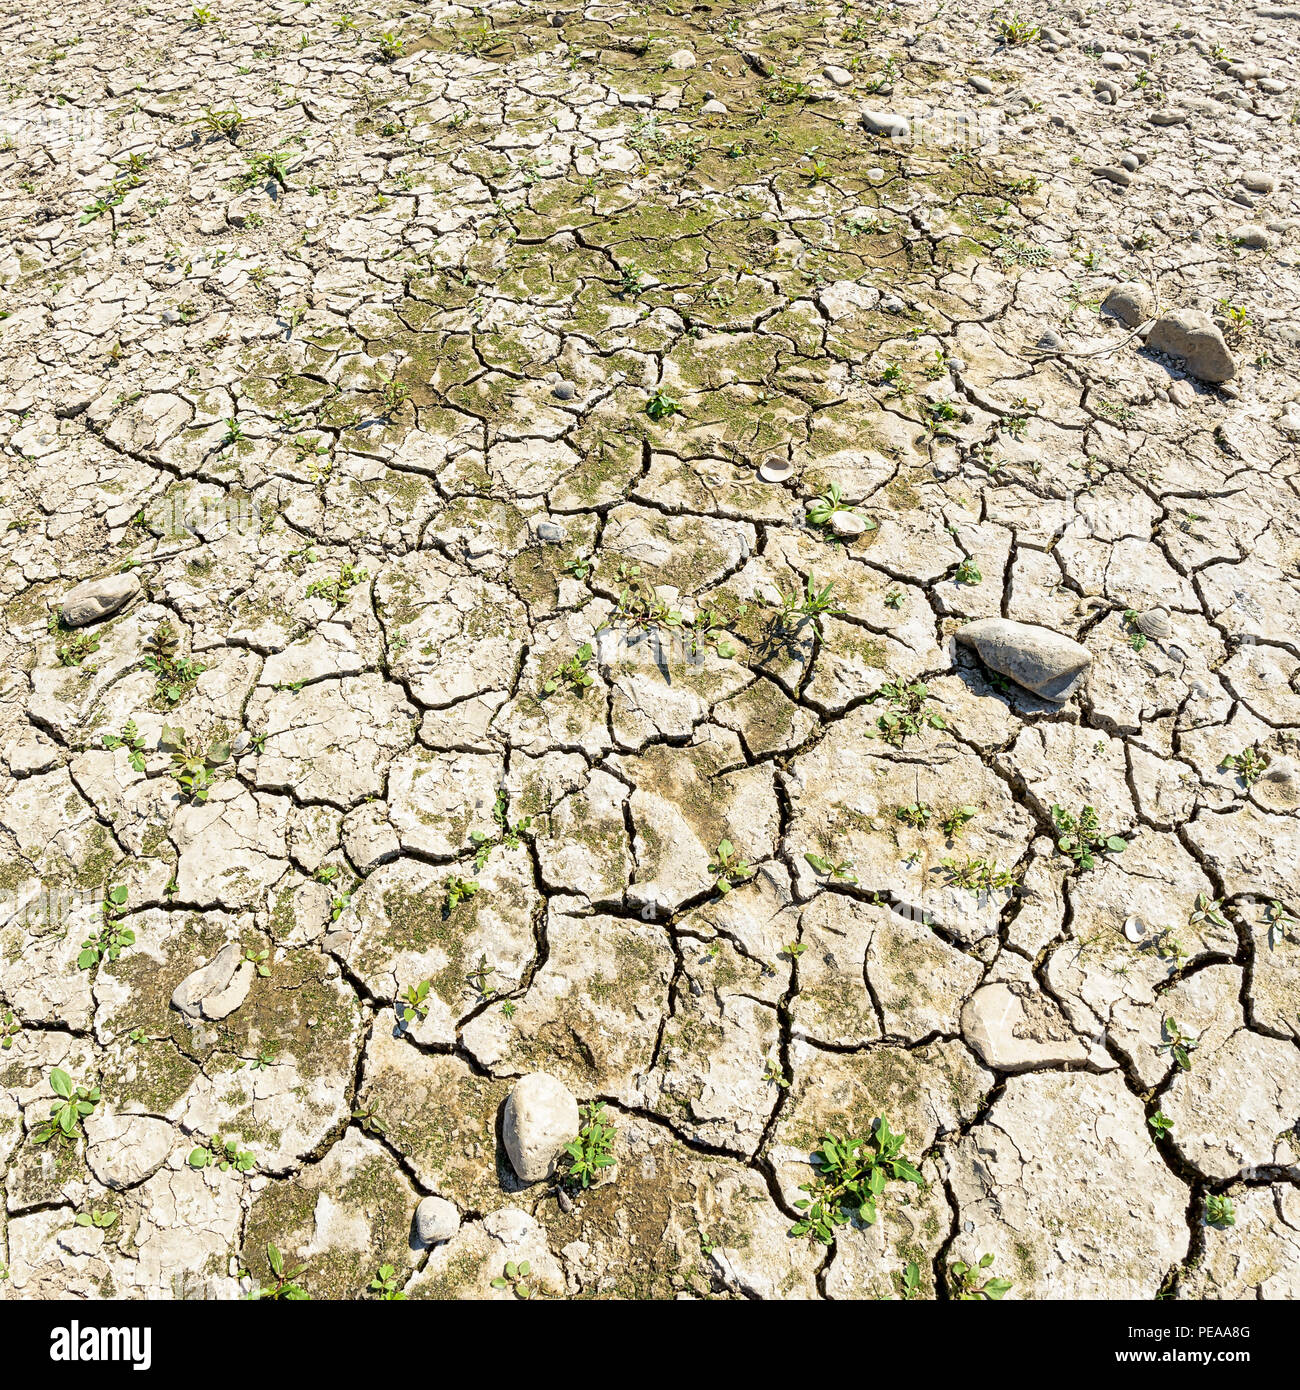 Dried-out cracked riverbed with stones and sediments in the river Rhine, caused by prolonged drought, North Rhine-Westphalia, Germany, Europe Stock Photo